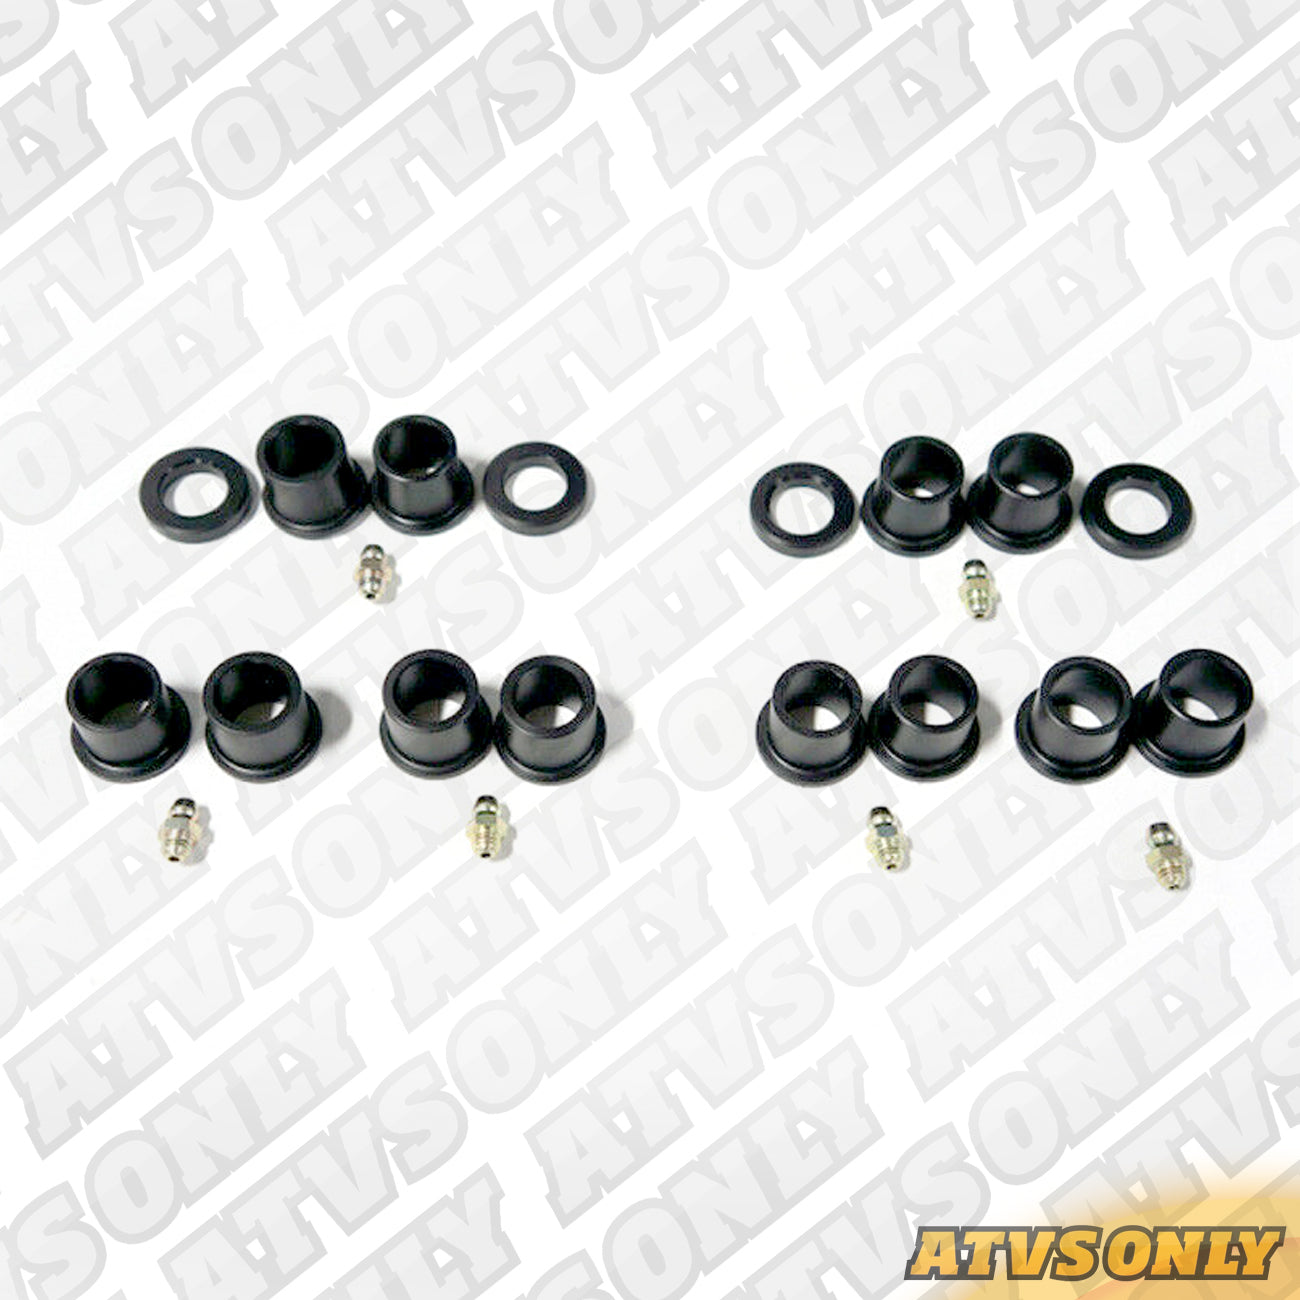 A-Arm Rebuild Kit for Lone Star Racing Easy Caster Adjustable A-Arms for Yamaha Applications